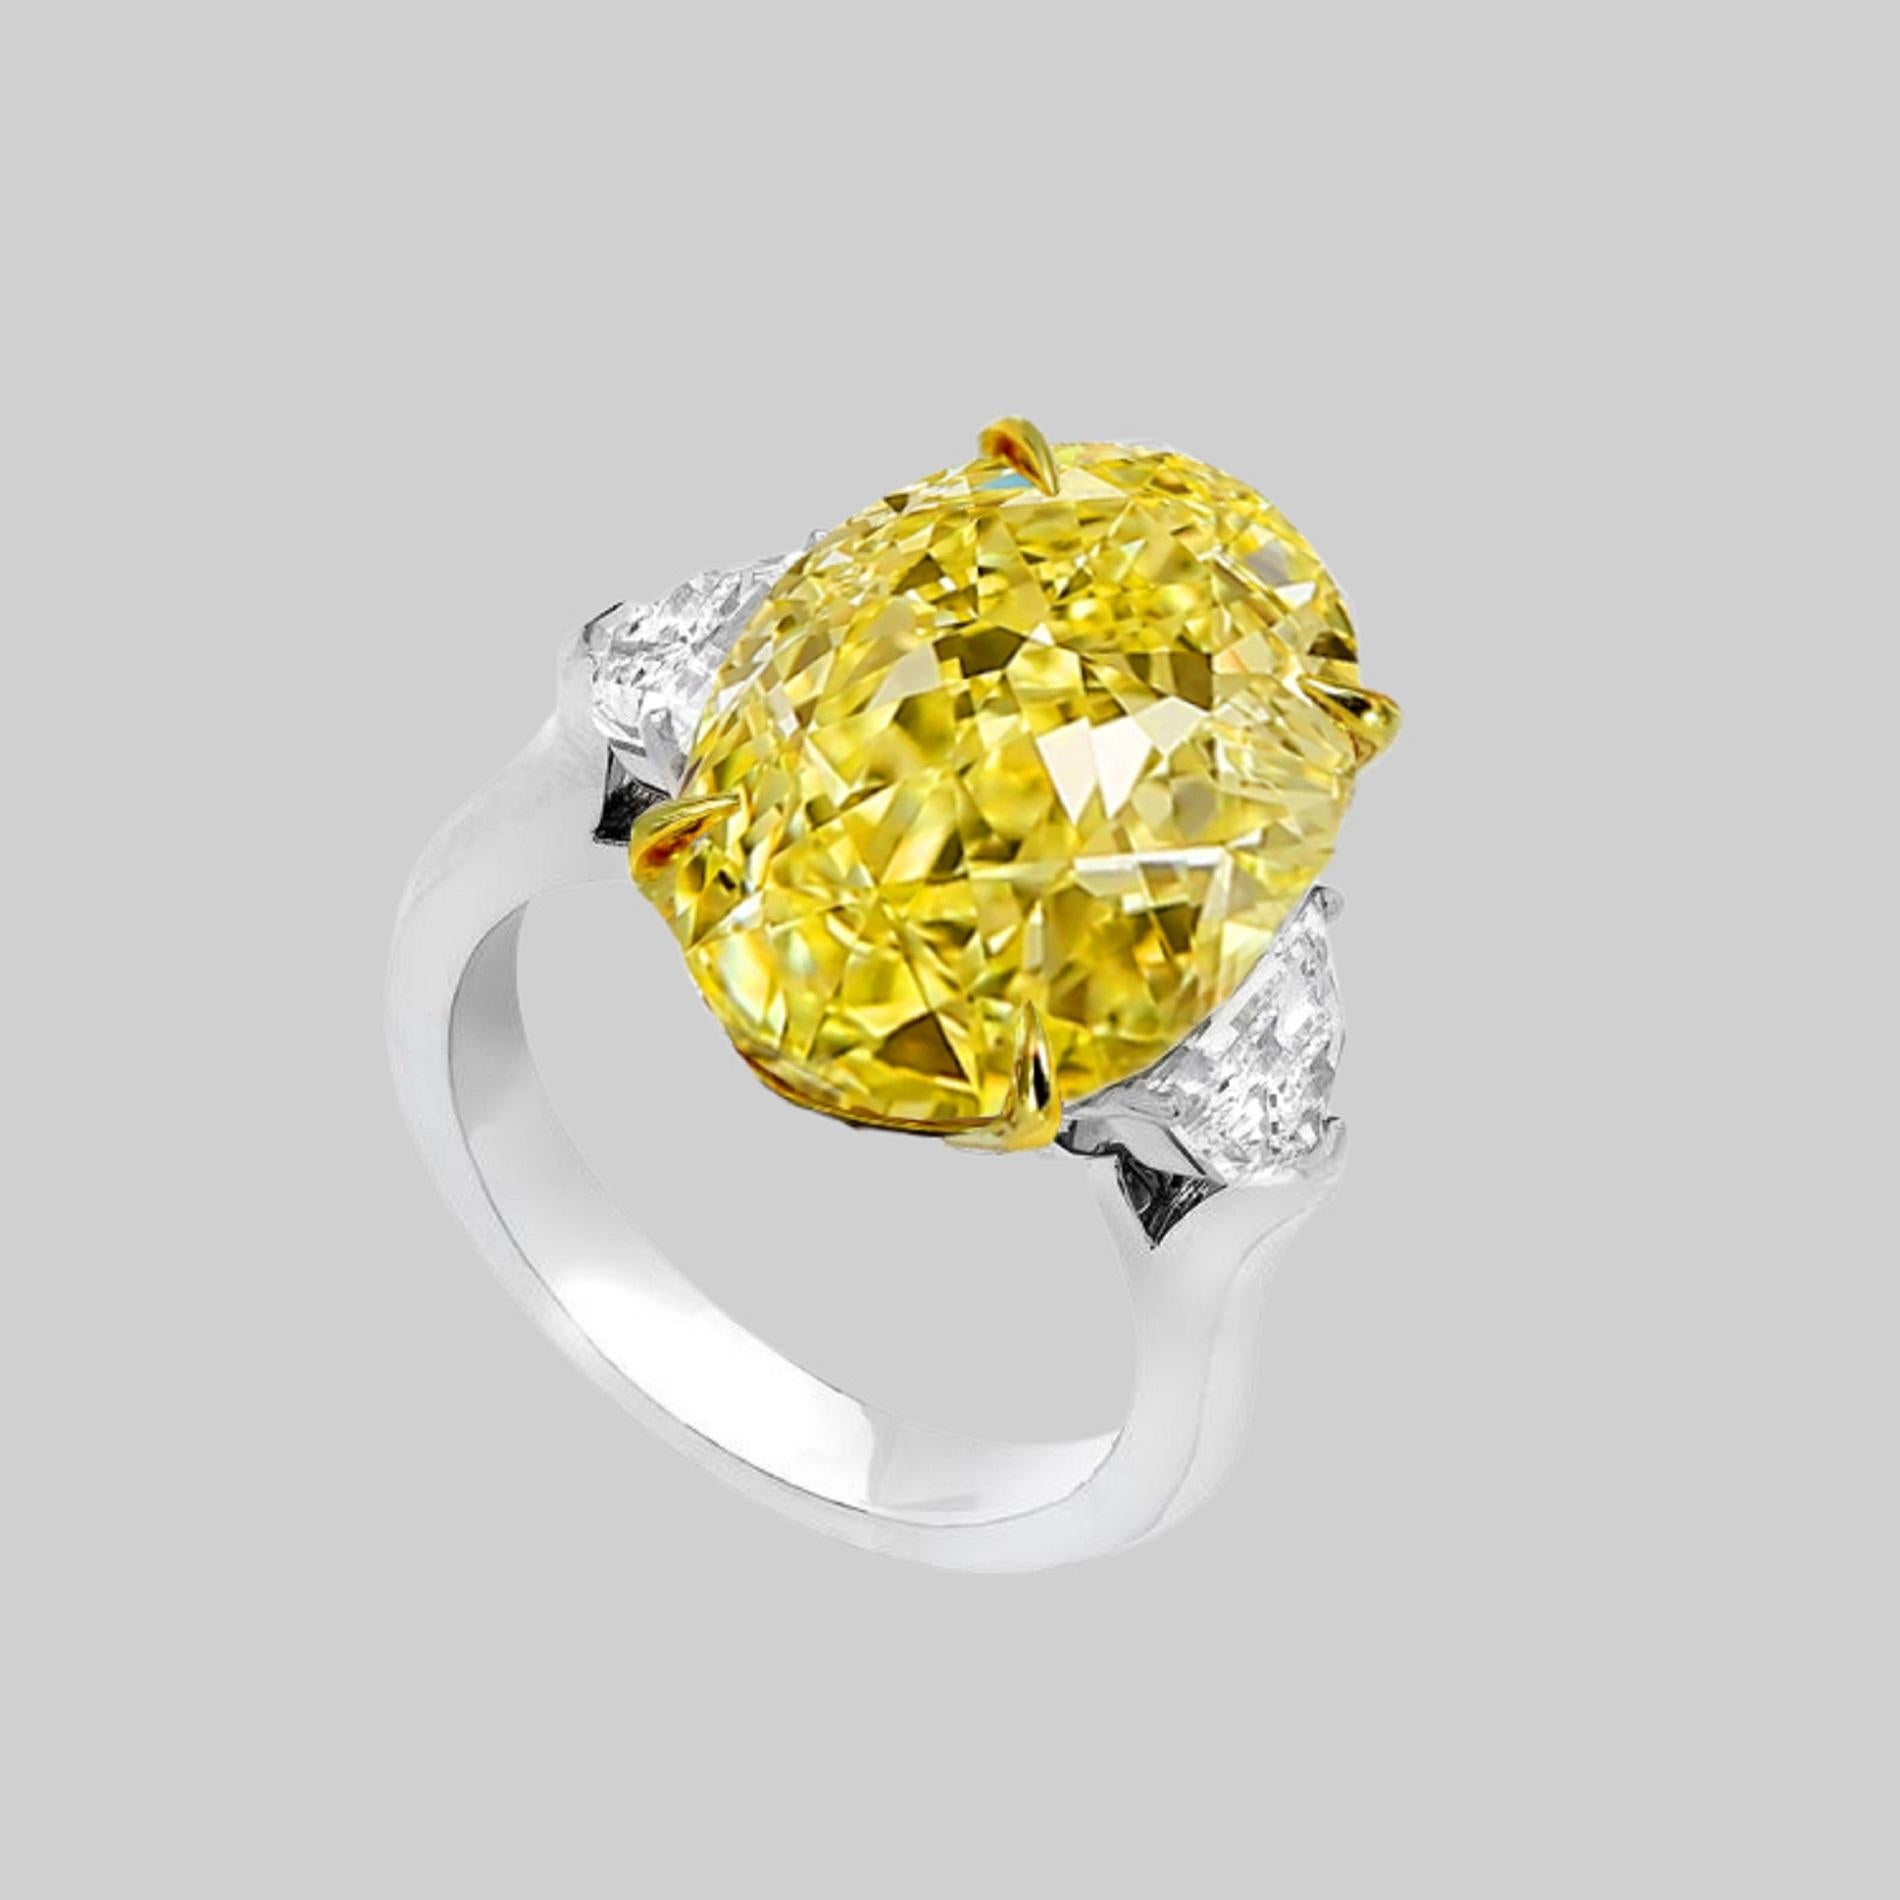 Introducing an exquisite piece of fine jewelry, this GIA Certified 7.08 Carat Fancy Yellow Oval Diamond Ring is a stunning testament to elegance and luxury. The central diamond is a magnificent 7.08 carat oval-shaped gem, showcasing a vibrant Fancy